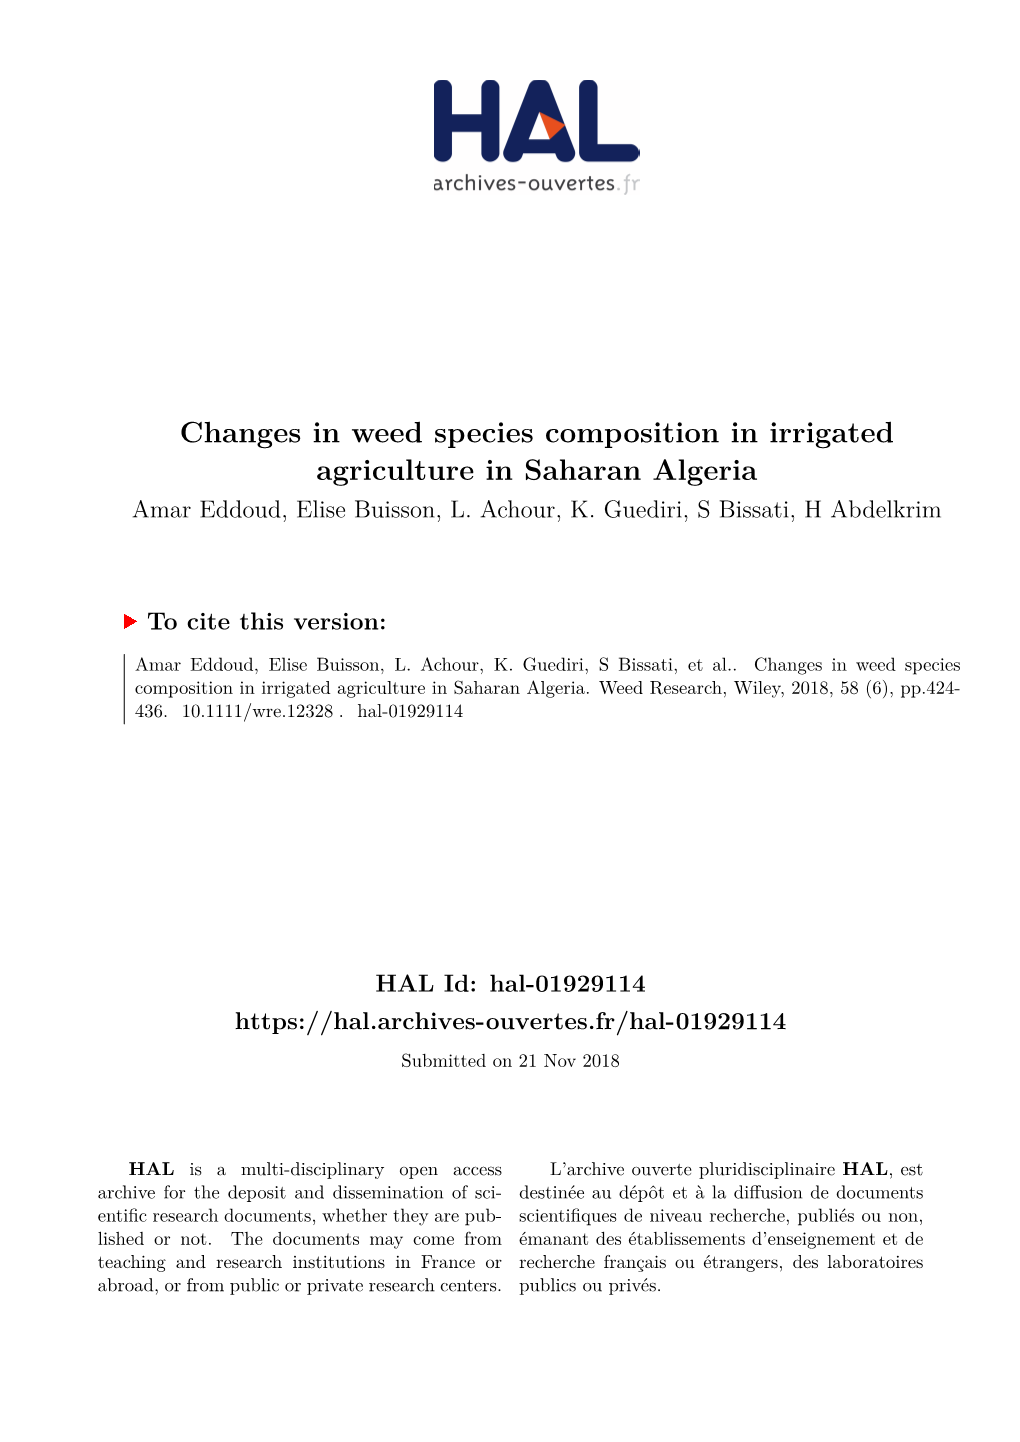 Changes in Weed Species Composition in Irrigated Agriculture in Saharan Algeria Amar Eddoud, Elise Buisson, L